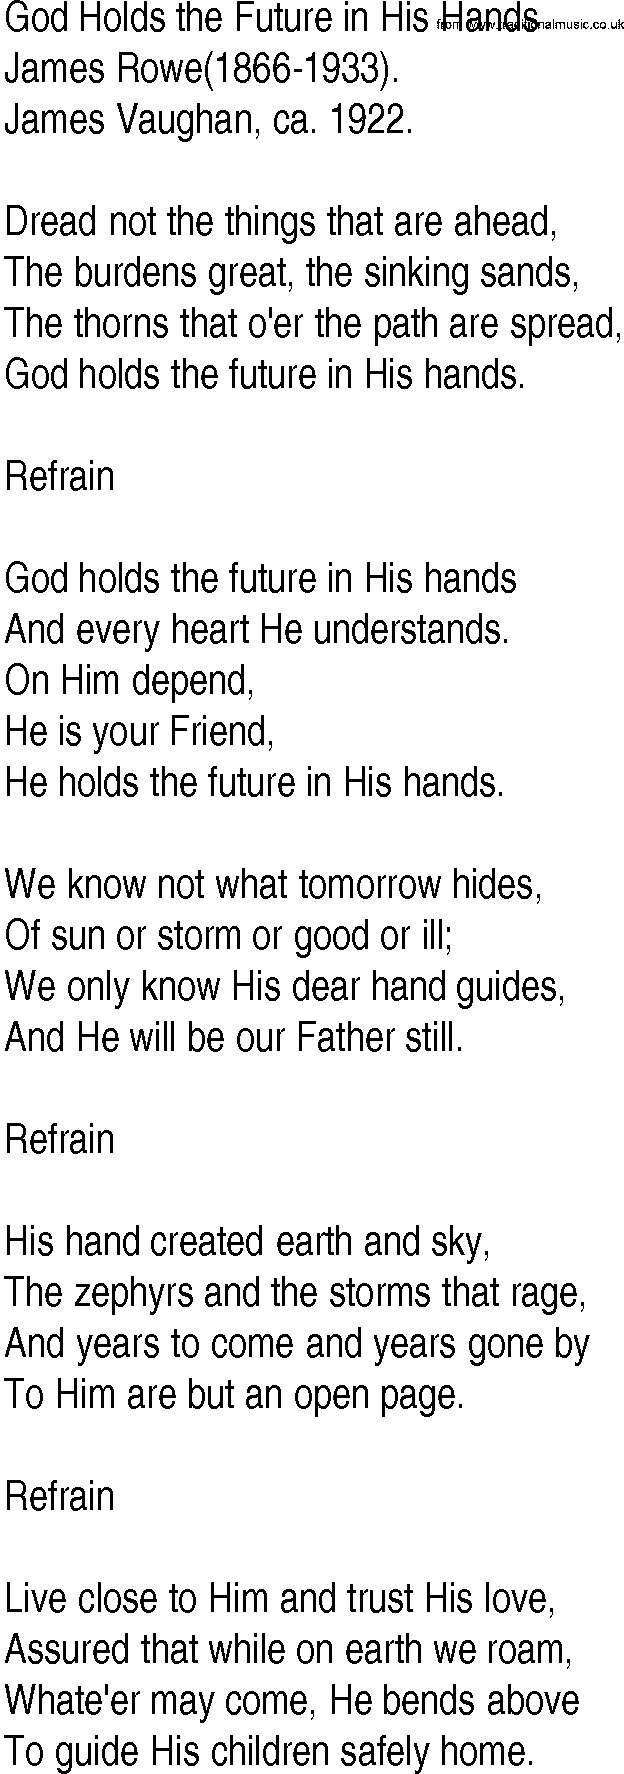 Hymn and Gospel Song: God Holds the Future in His Hands by James Rowe lyrics